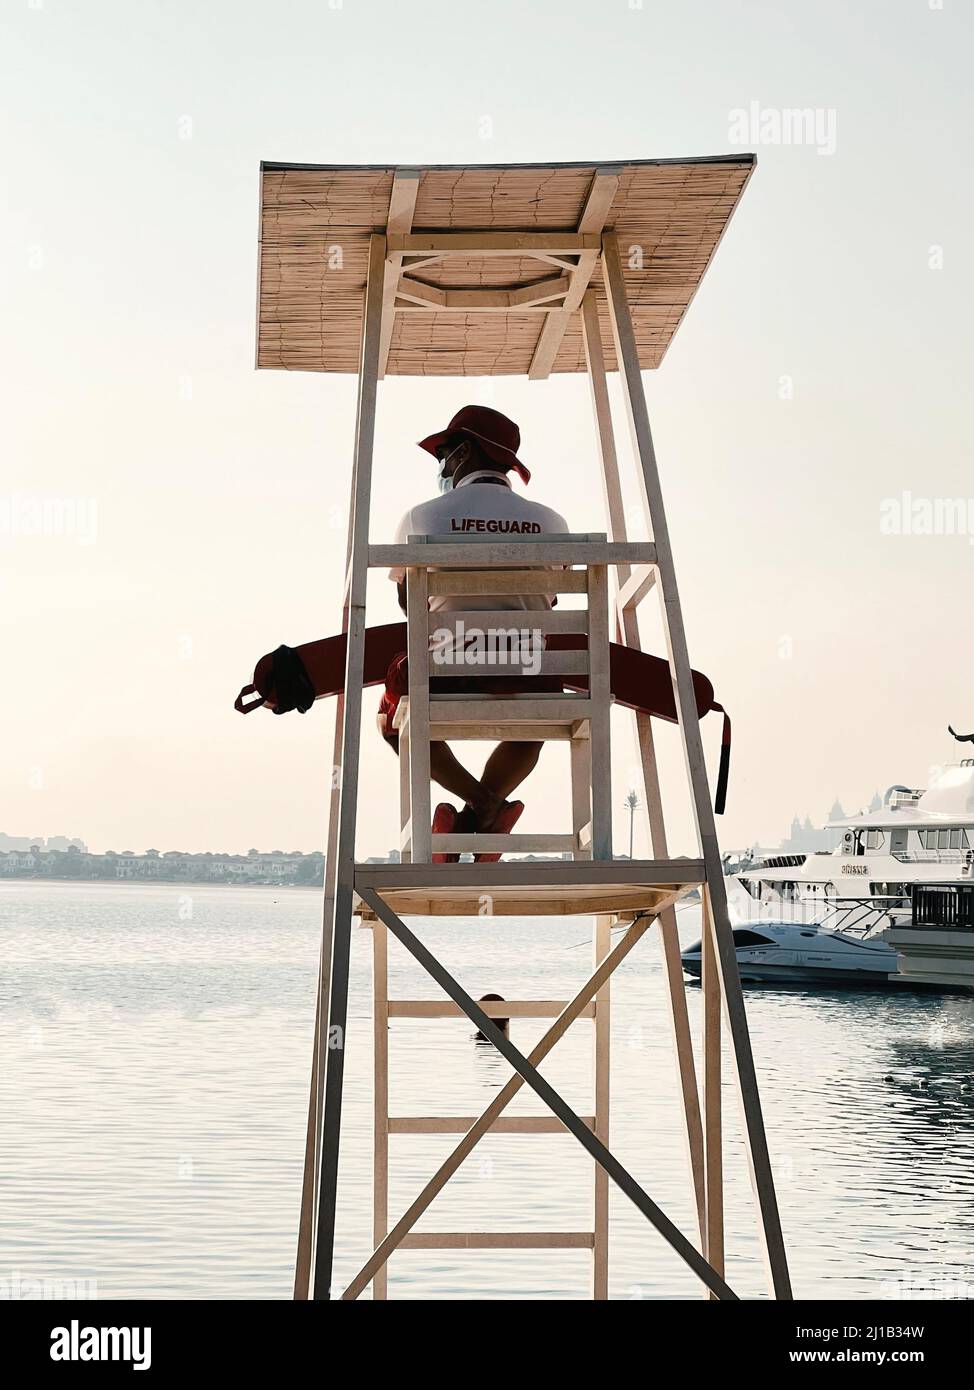 Lifeguard is sitting on wooden chair on tower watching the sea in Dubai. Boat is moored, the sea is calm. Nobody is in water Stock Photo